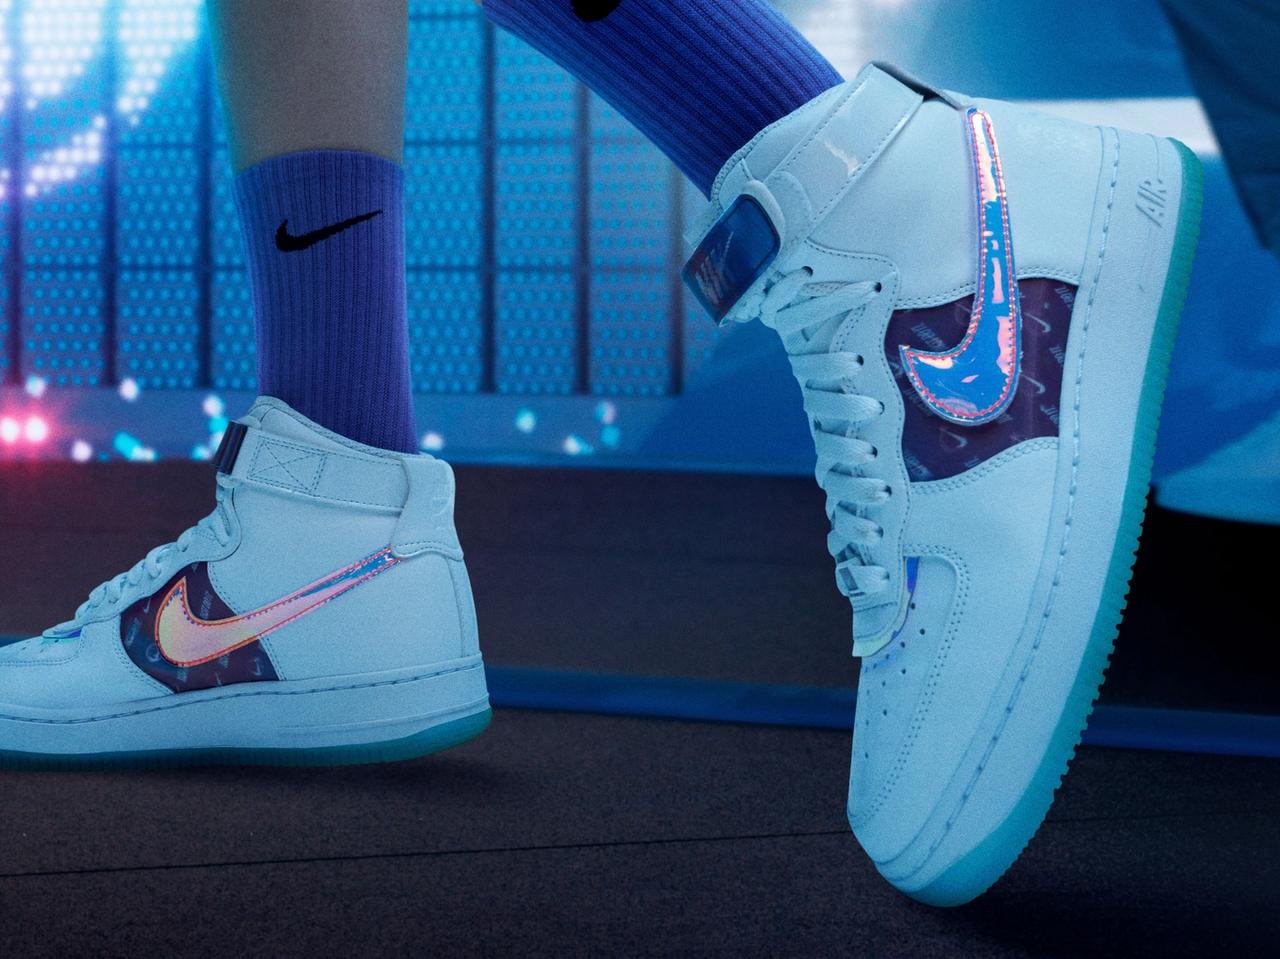 The Nike Air Force 1 Joins the 'Worldwide' Collection - Sneaker Freaker